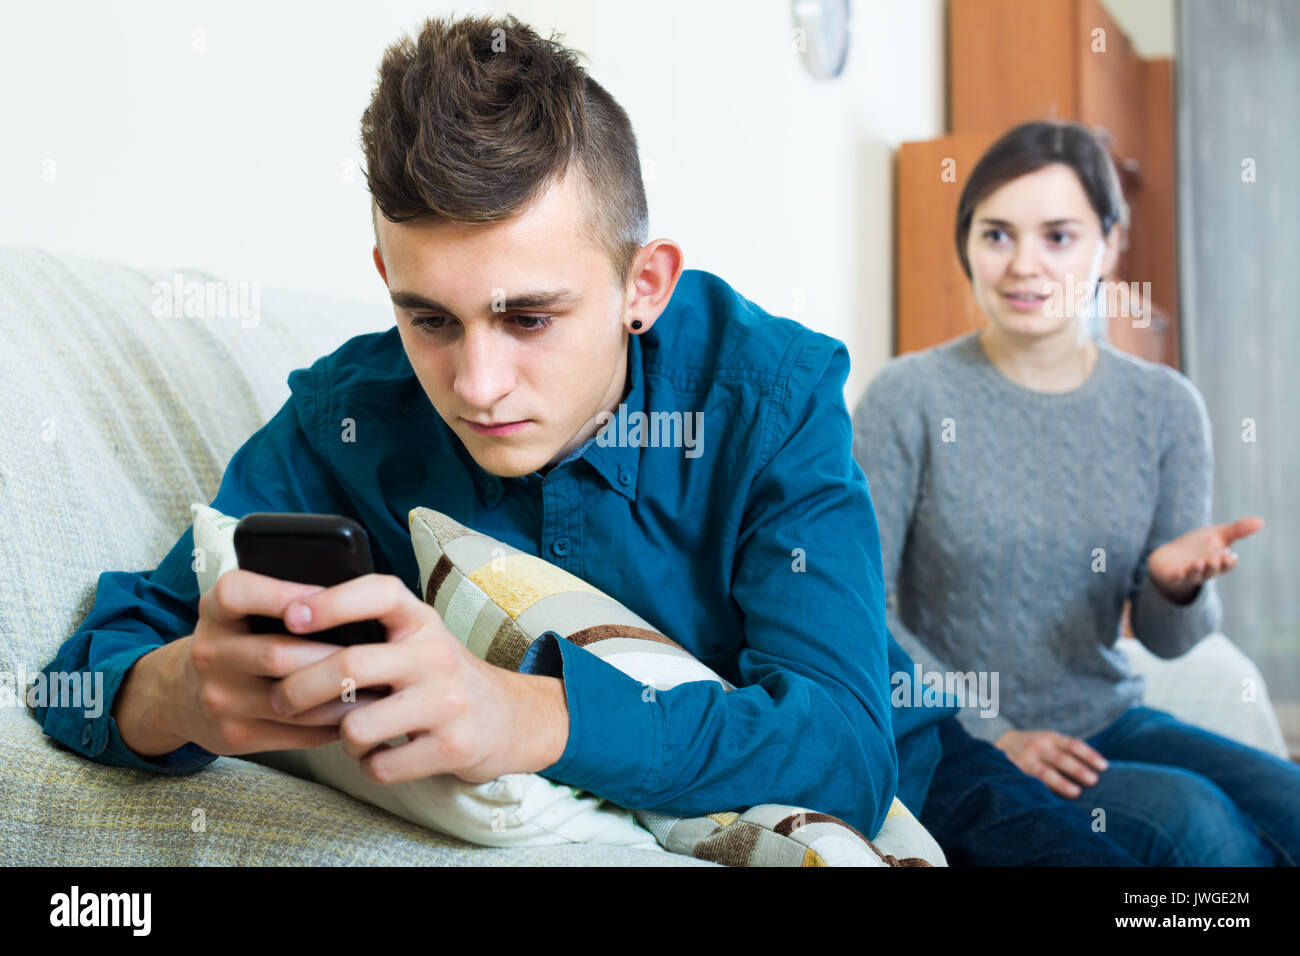 spanish teen age son playing with phone, mother trying to talk Stock Photo